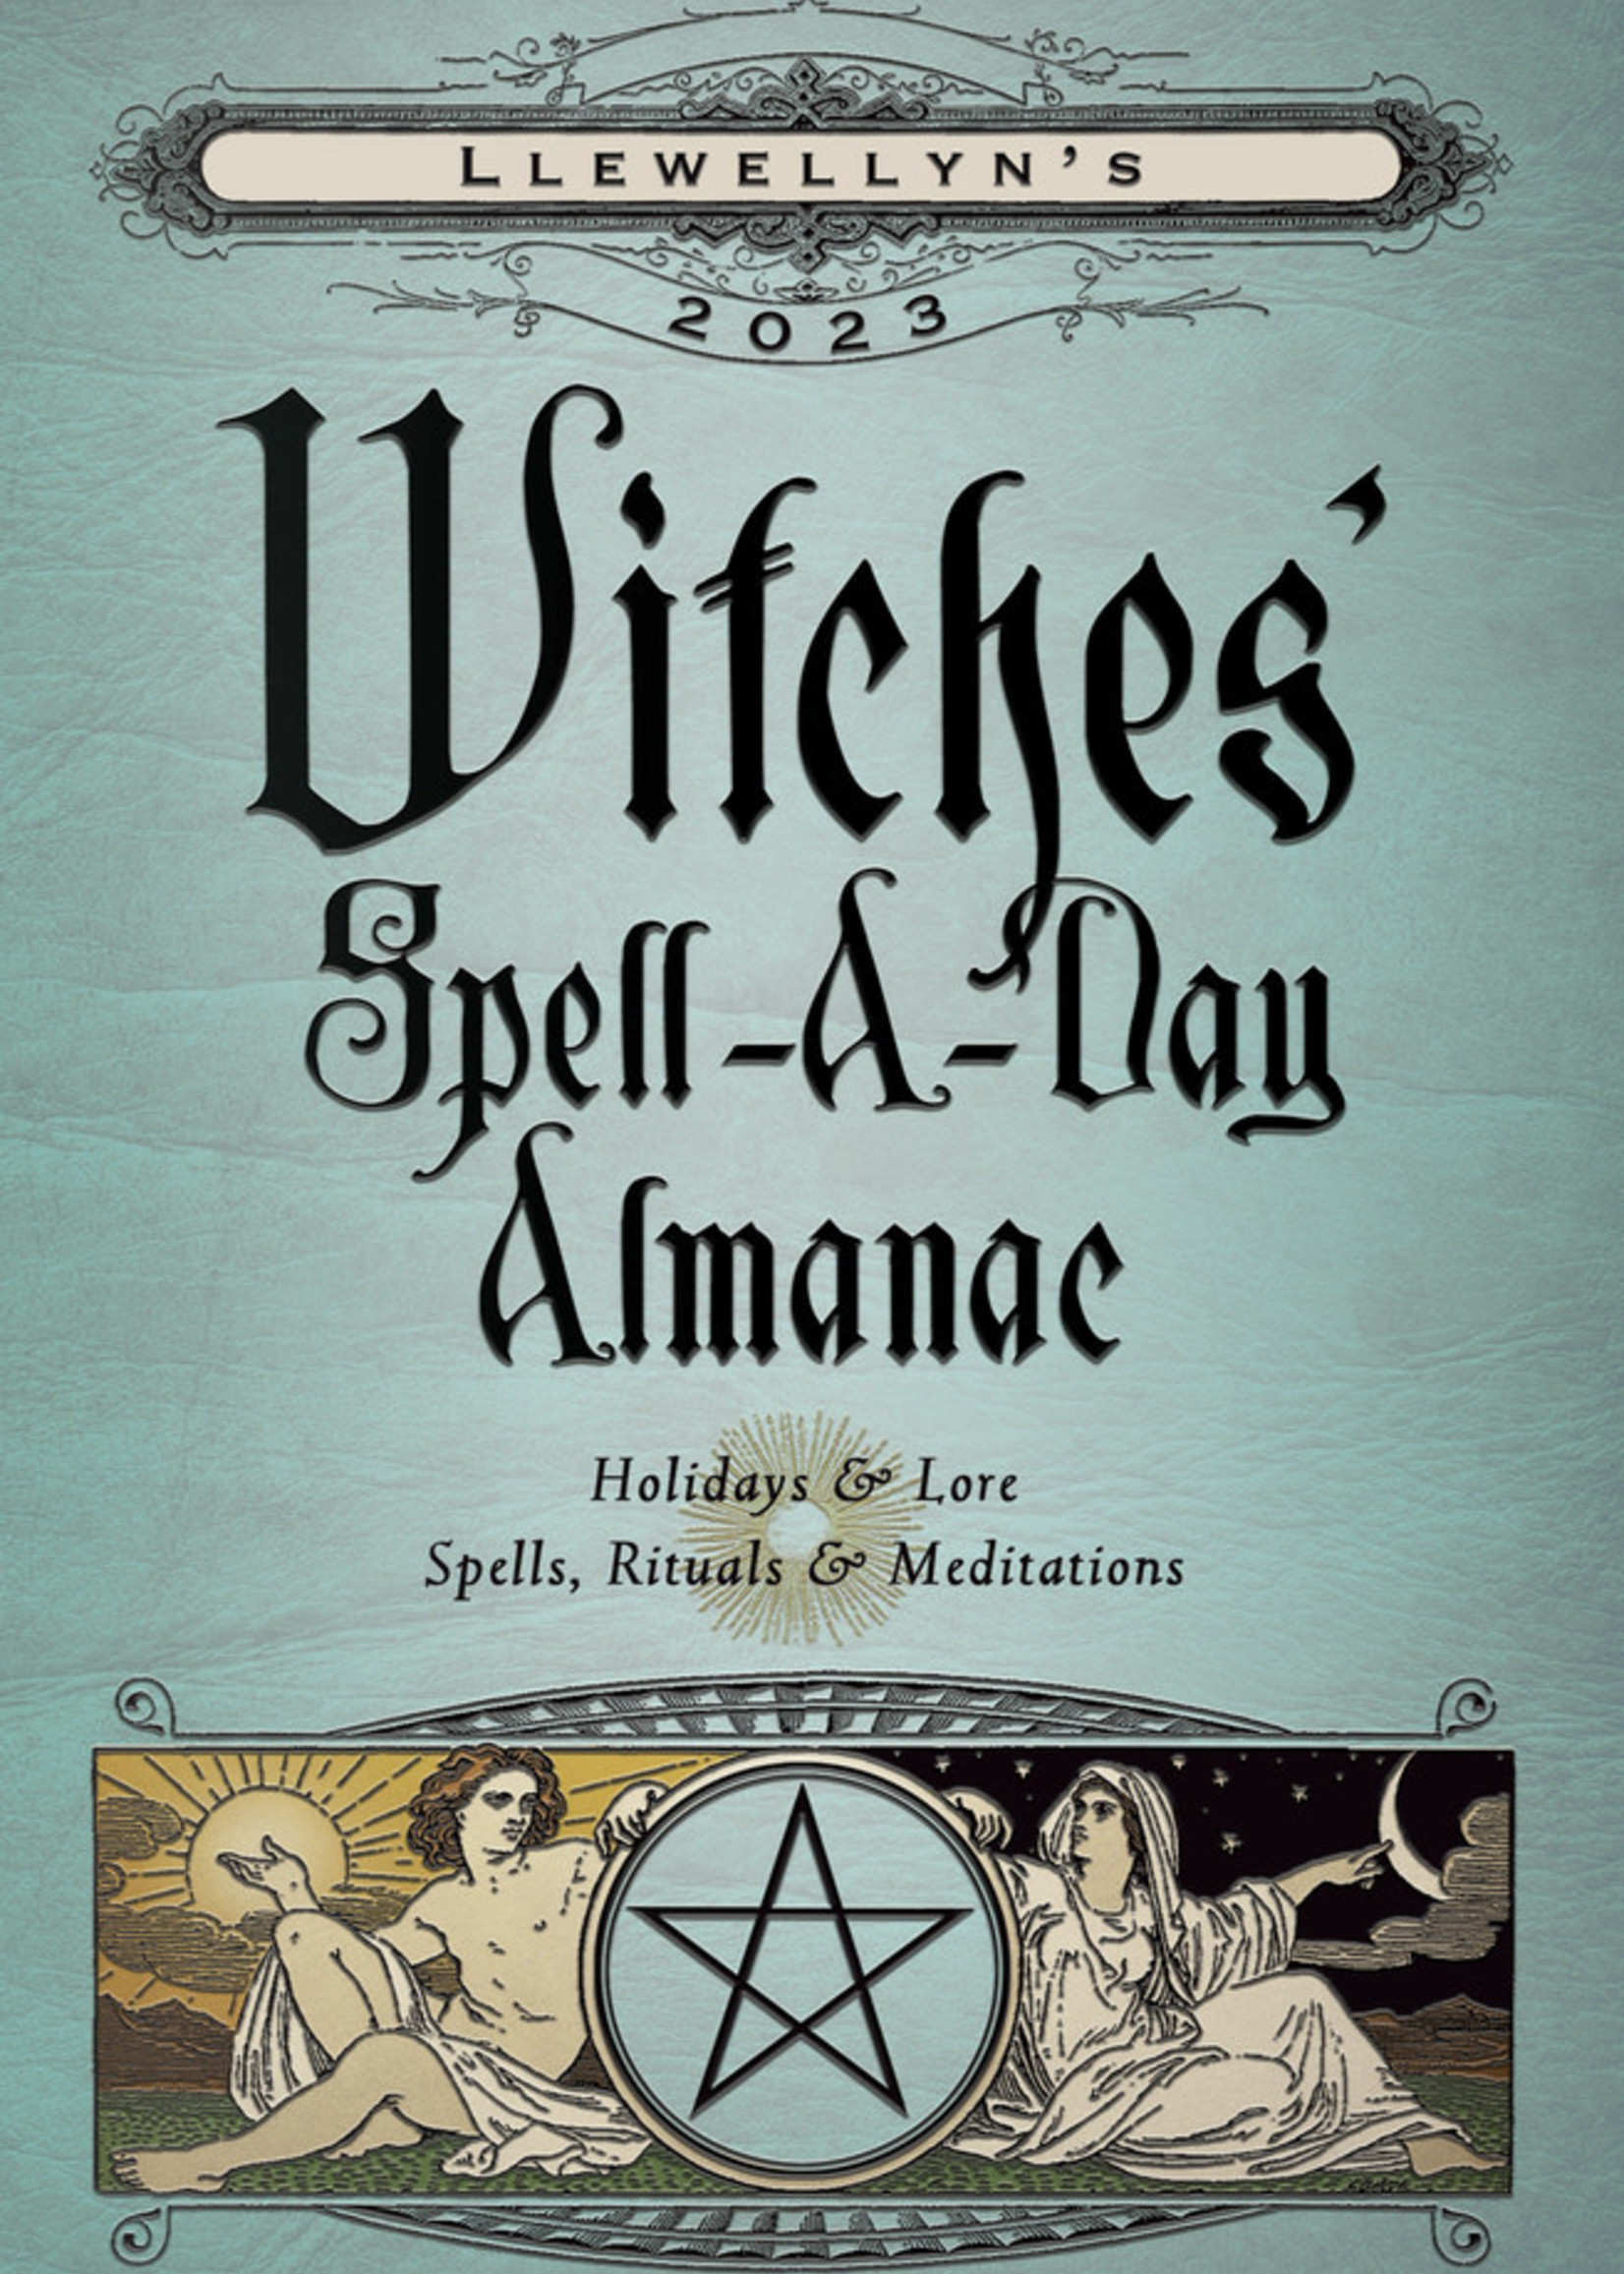 Witches Spell-A-Day Almanac